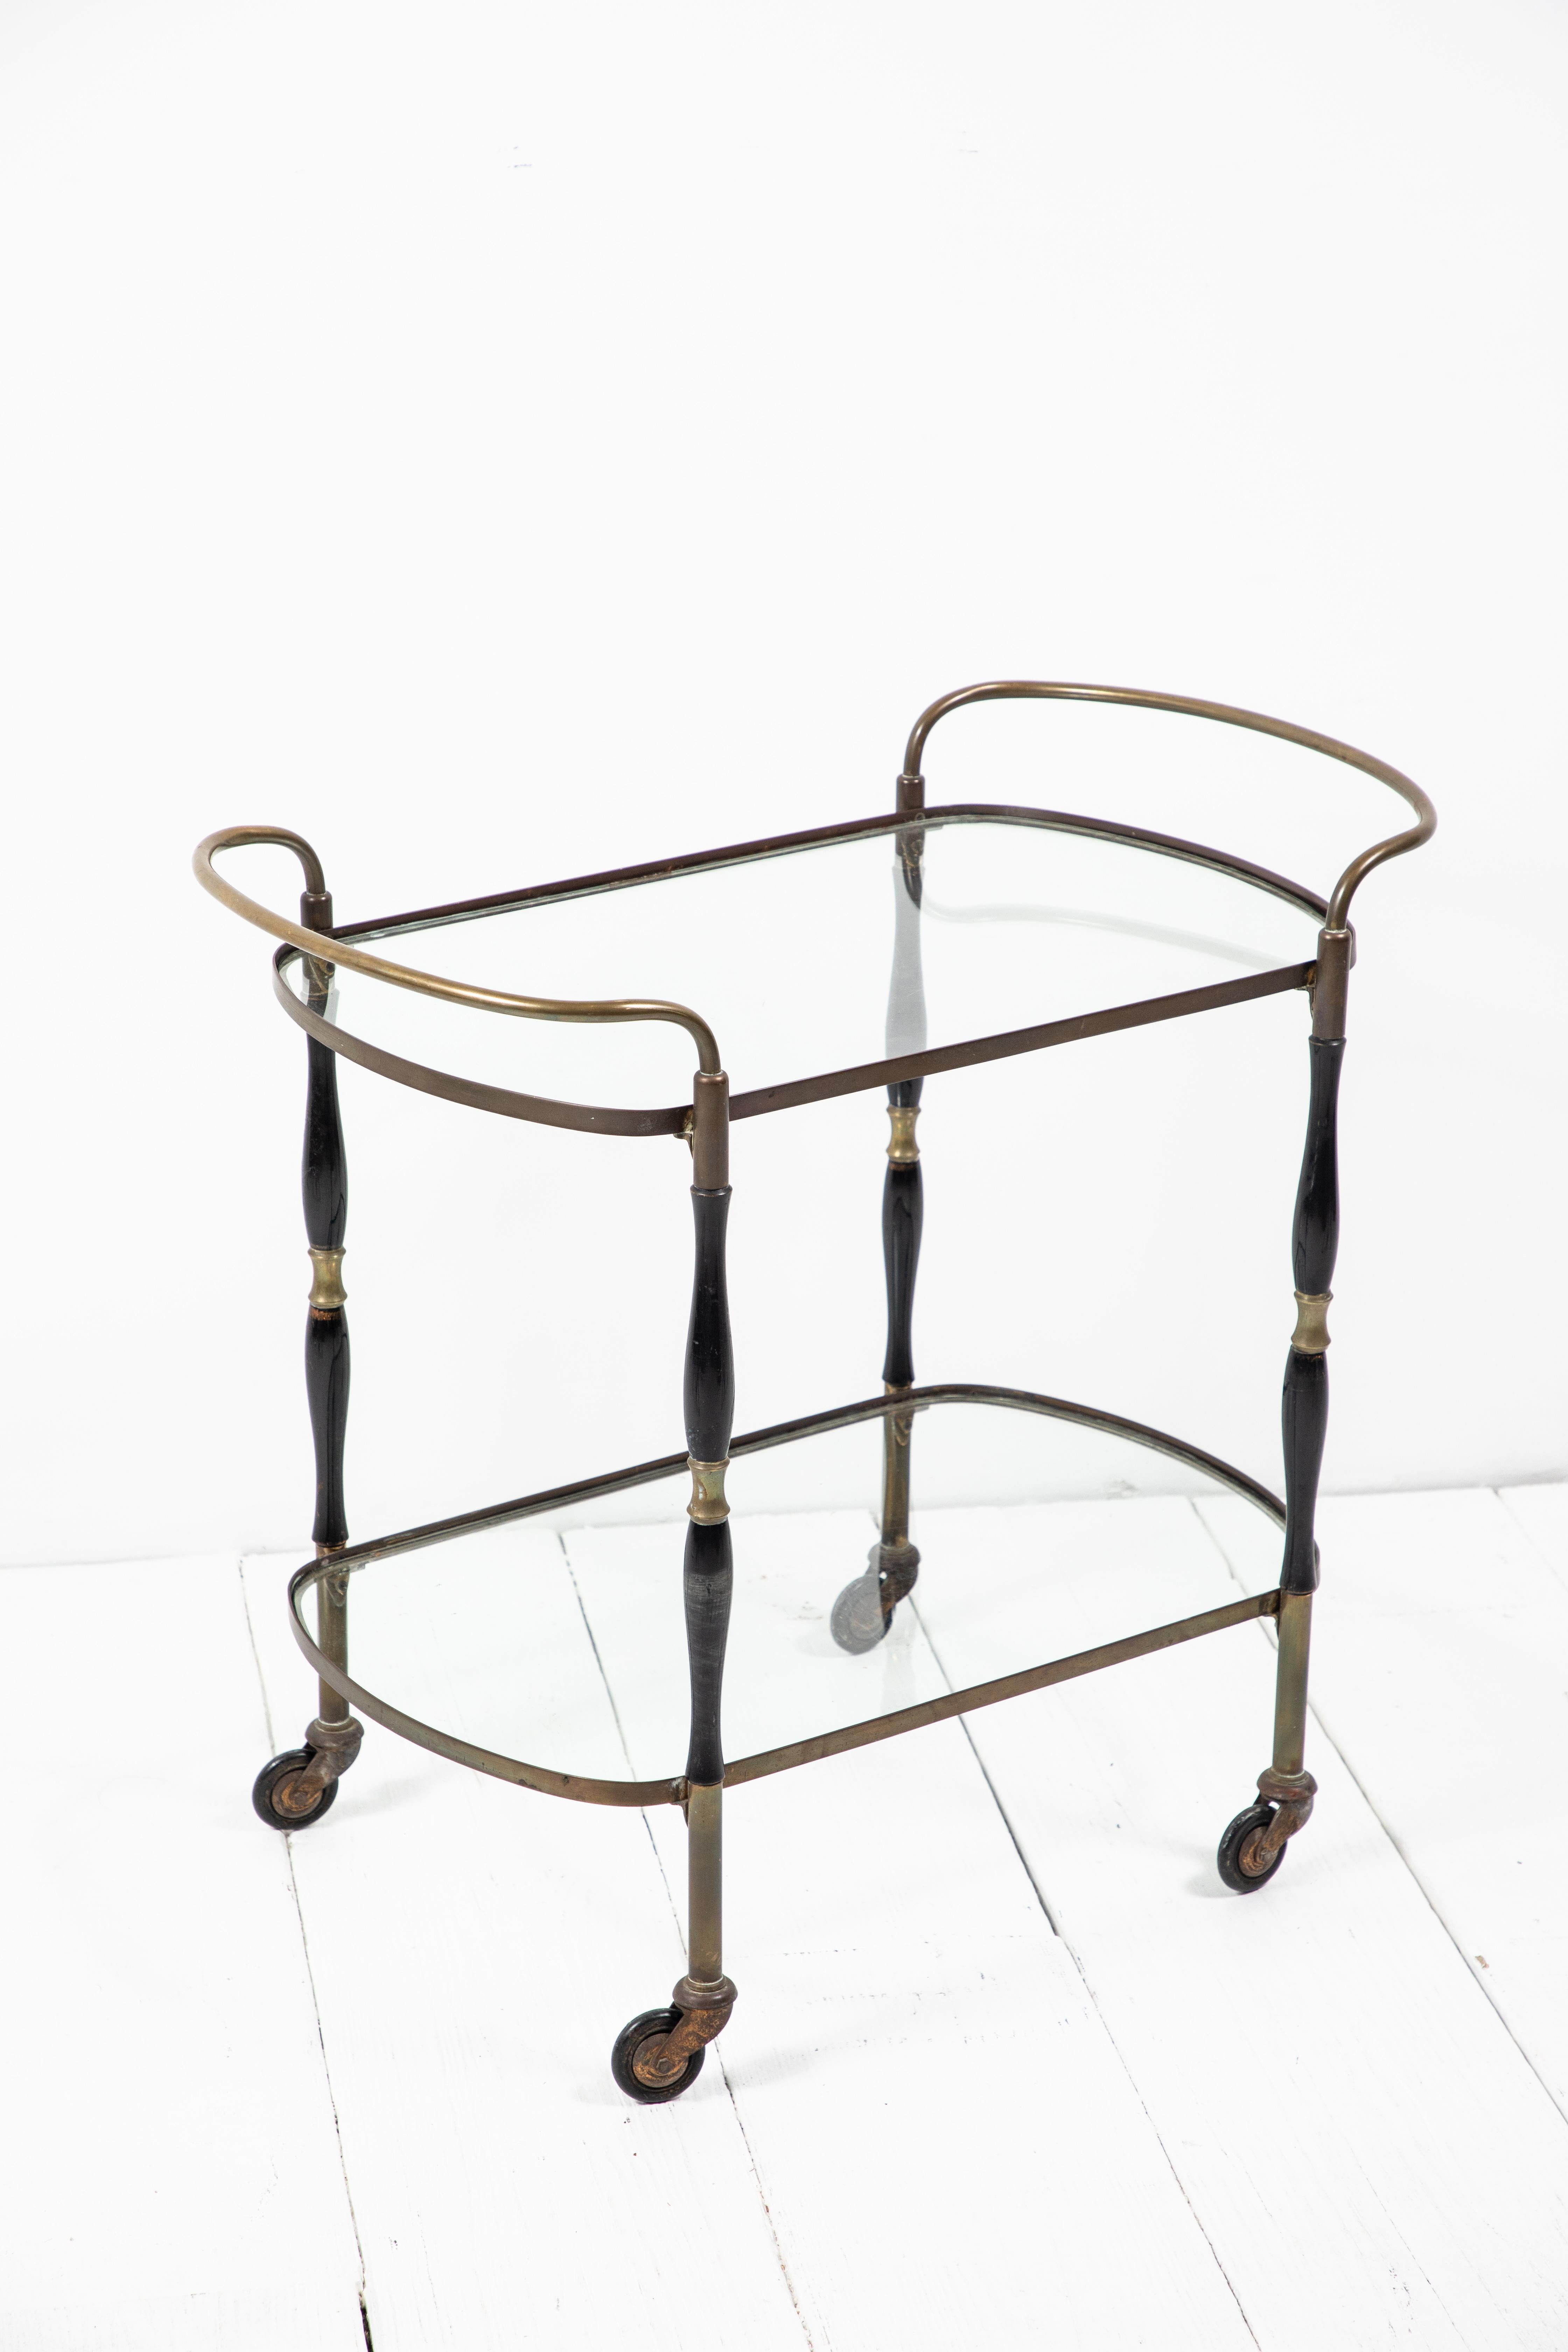 Beautiful deco bar cart with black and brass turned legs with two glass shelves. The bar cart sits on wheels.